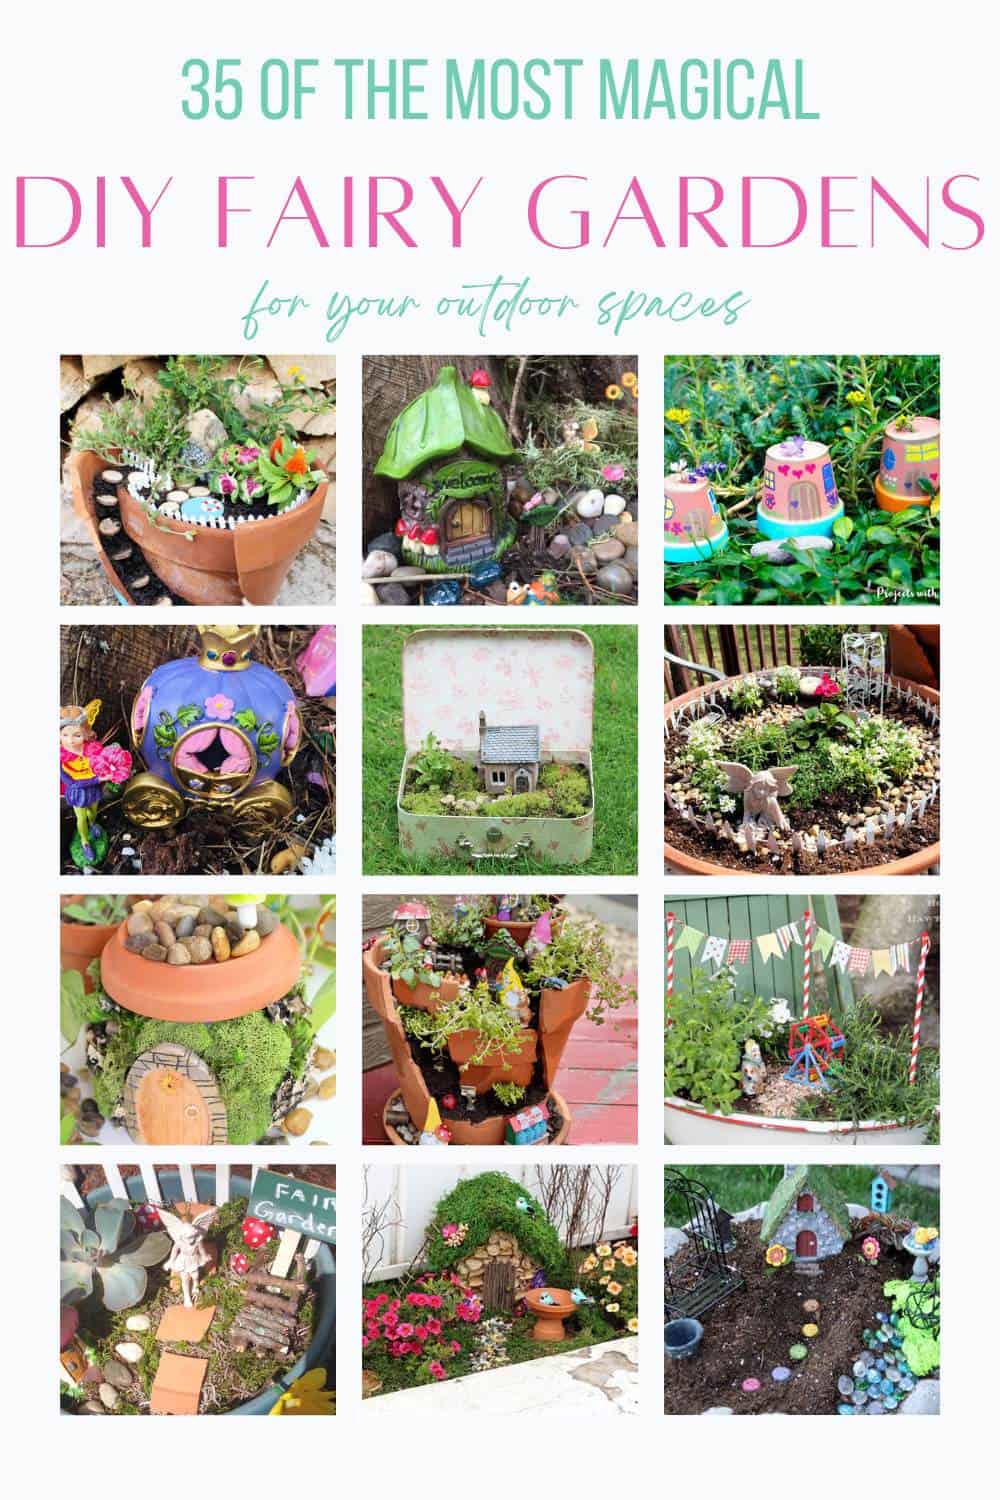 collage with 12 diy fairy garden ideas with text overlay.